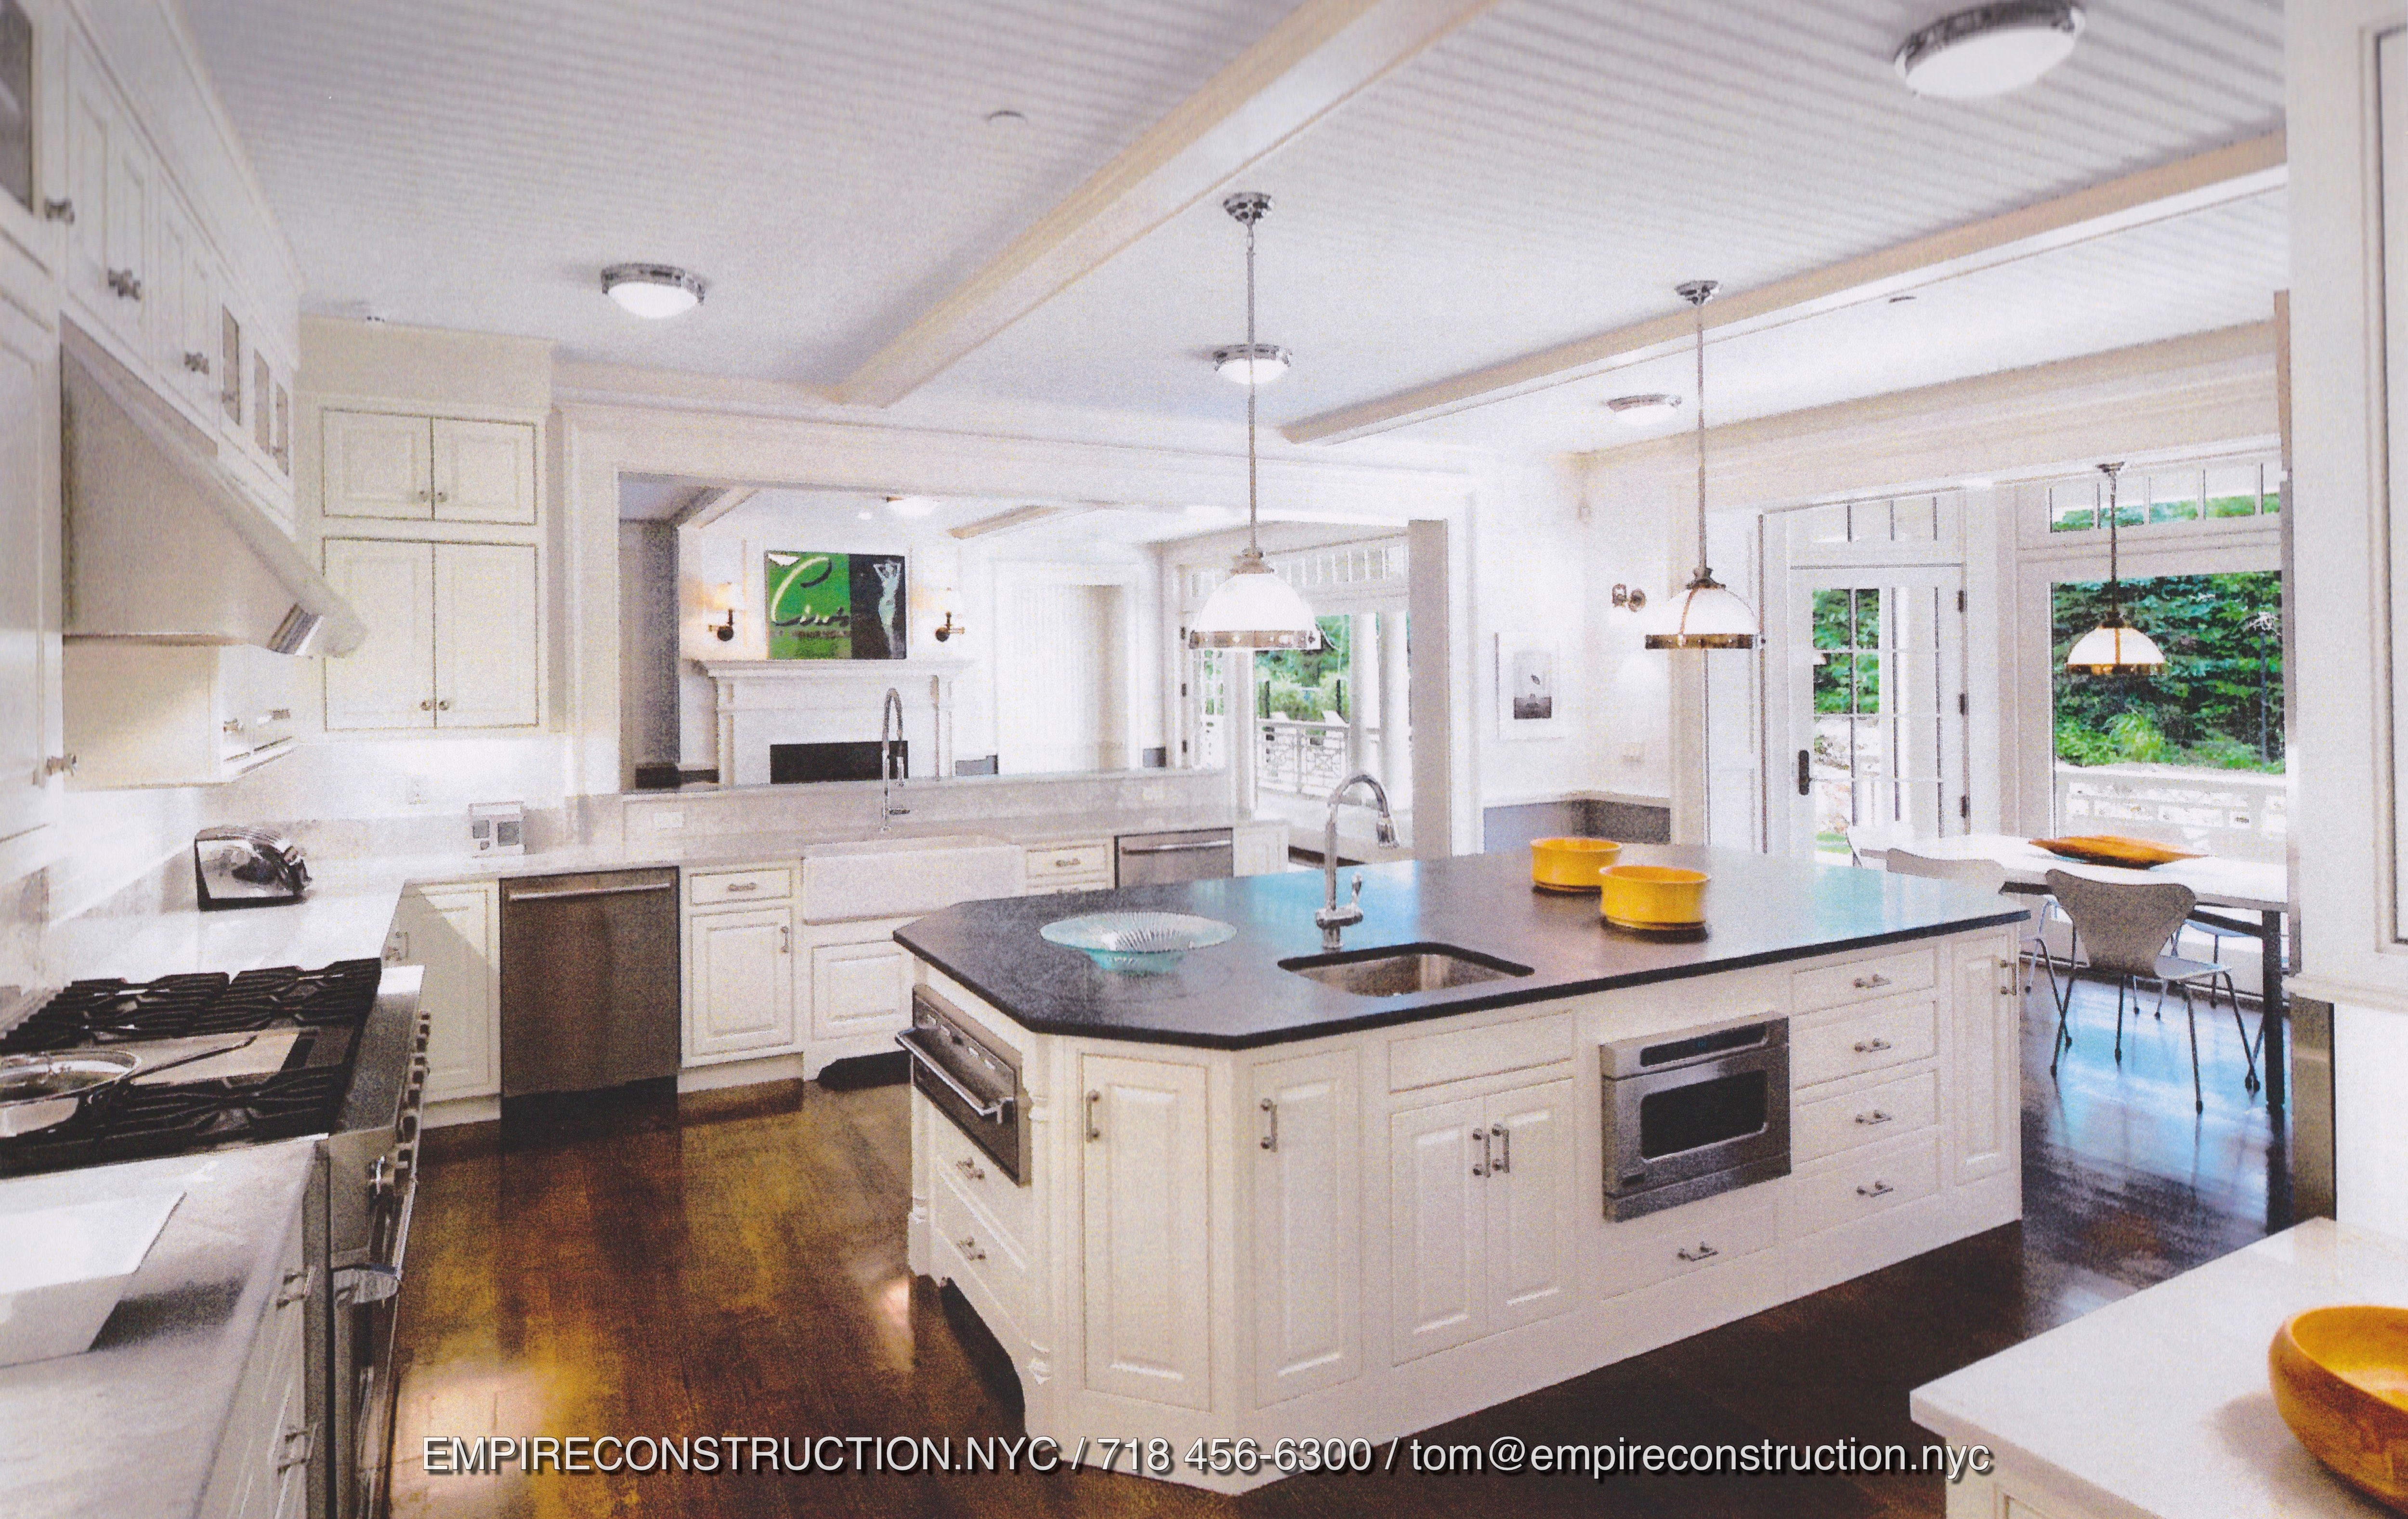 We specialize in all facets of kitchen building. Design build, commercial, stainless steel, charming country, minimalist and sophisticated  wood and white modern kitchens. Islands, countertops, cabinets, shelves, tables, wall designs, brick walls, custom designed and build fixtures and decorations, tile and stone backsplashes. Planning, designining, construction and installation - we will take care of the whole process for you.